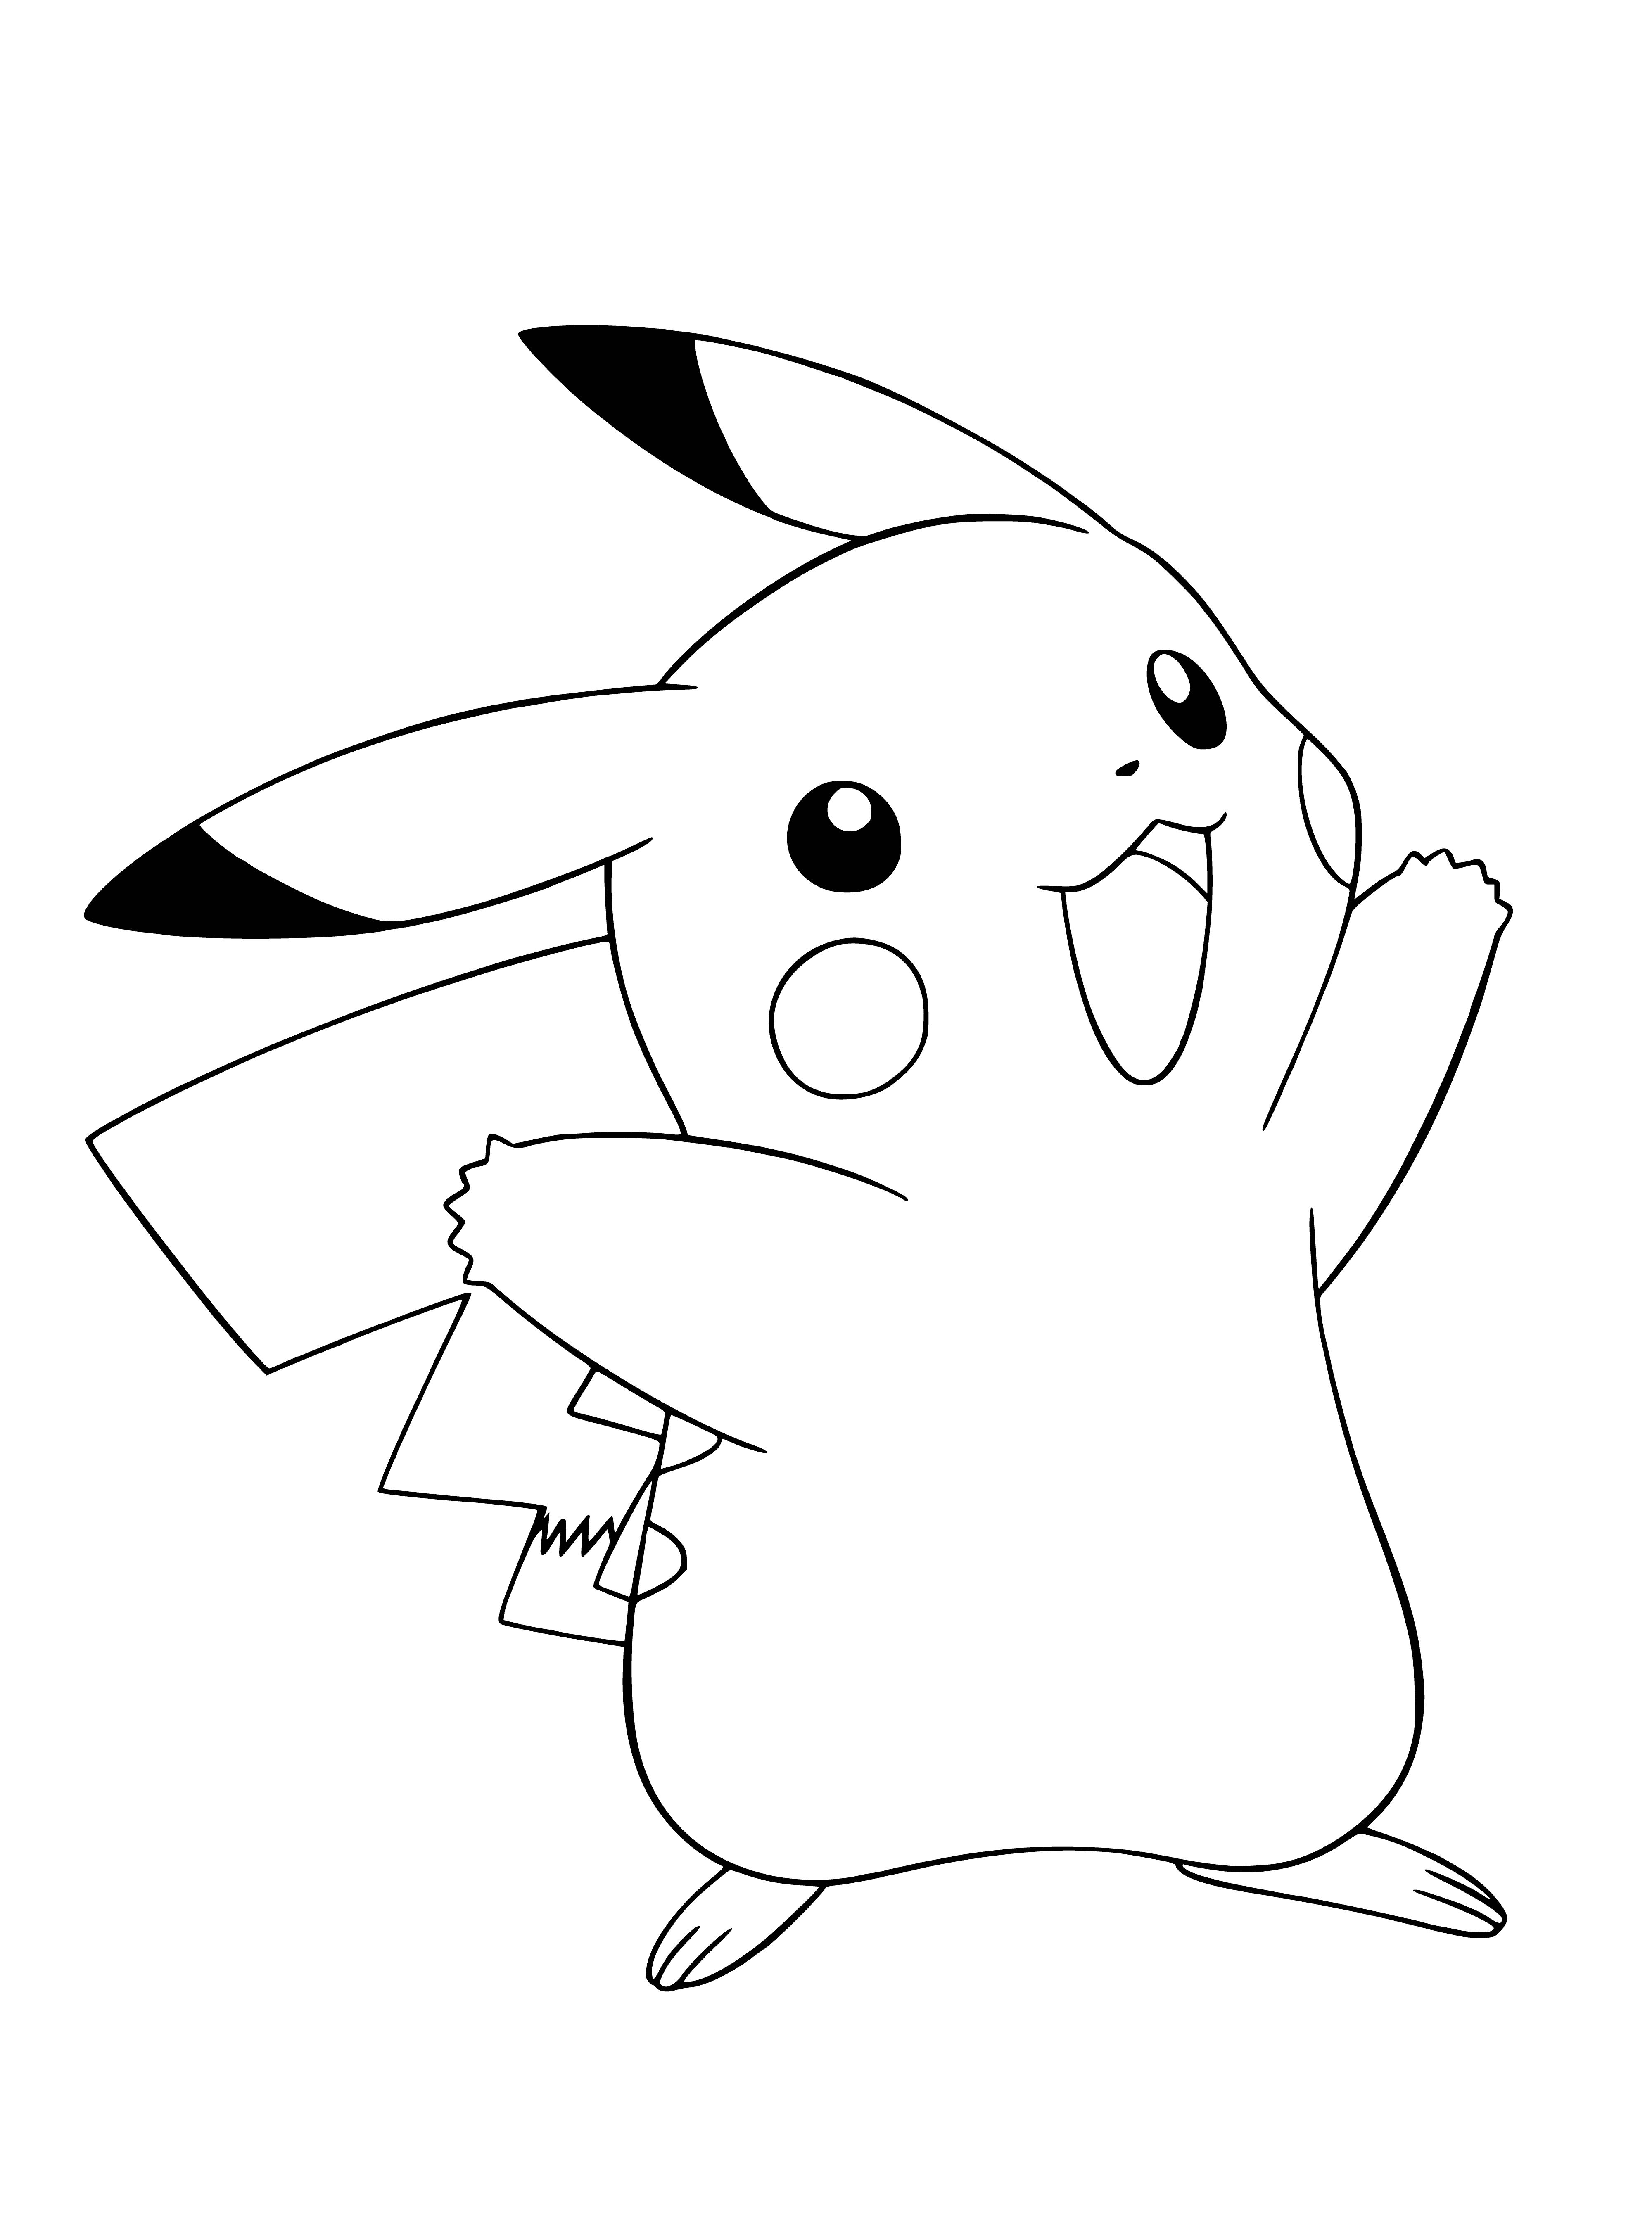 coloring page: A Pikachu is a small rodent-like Pokémon with yellow stripes & electric sac, two brown cheeks & a lightning bolt-shaped tail.